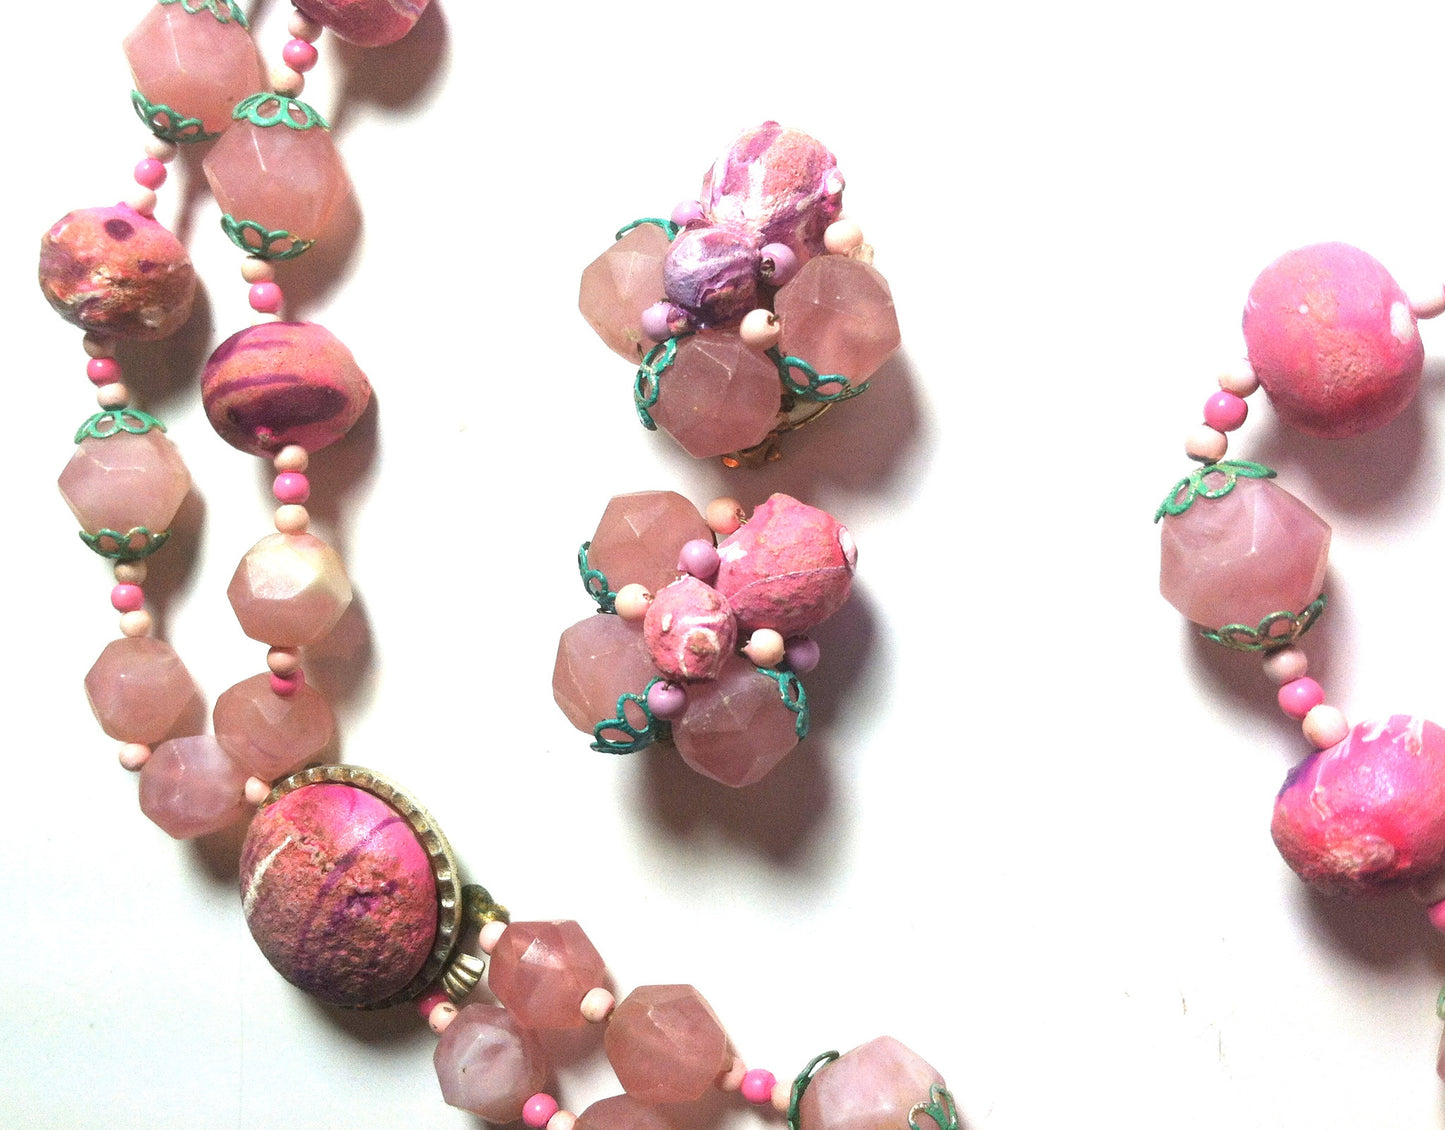 Swirled Pink Sugar Coated Double Strand Beaded Necklace and Clip Earrings circa 1960s